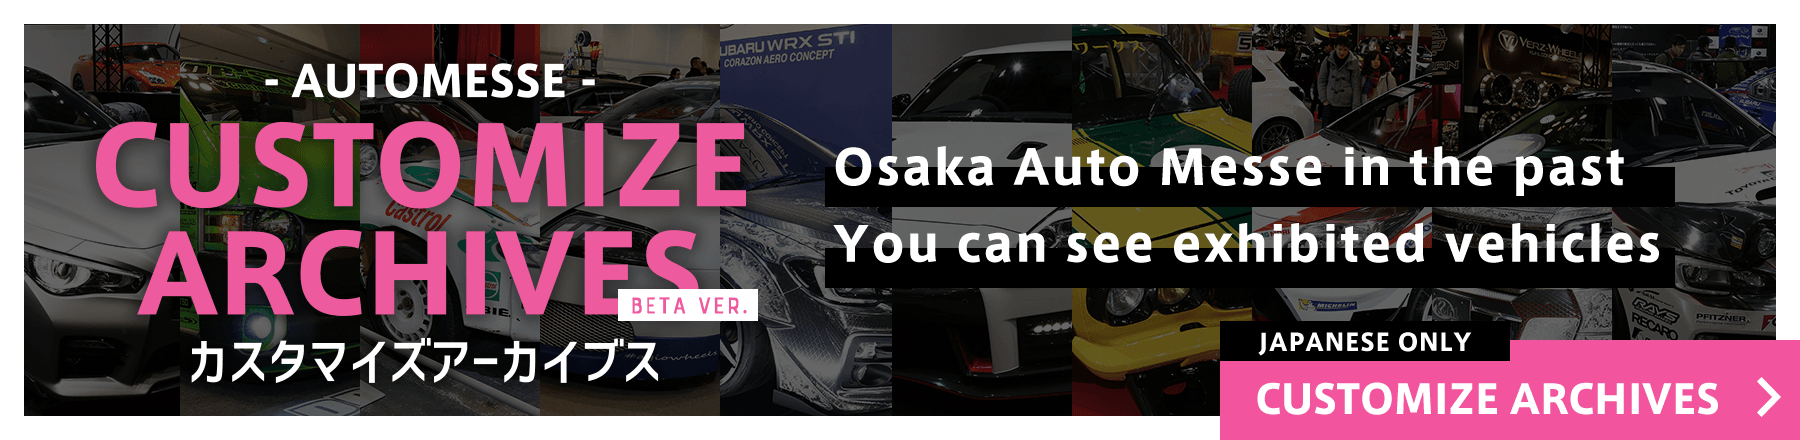 CUSTOMIZE ARCHIVES / Osaka Auto Messe in the past You can see exhibited vehicles